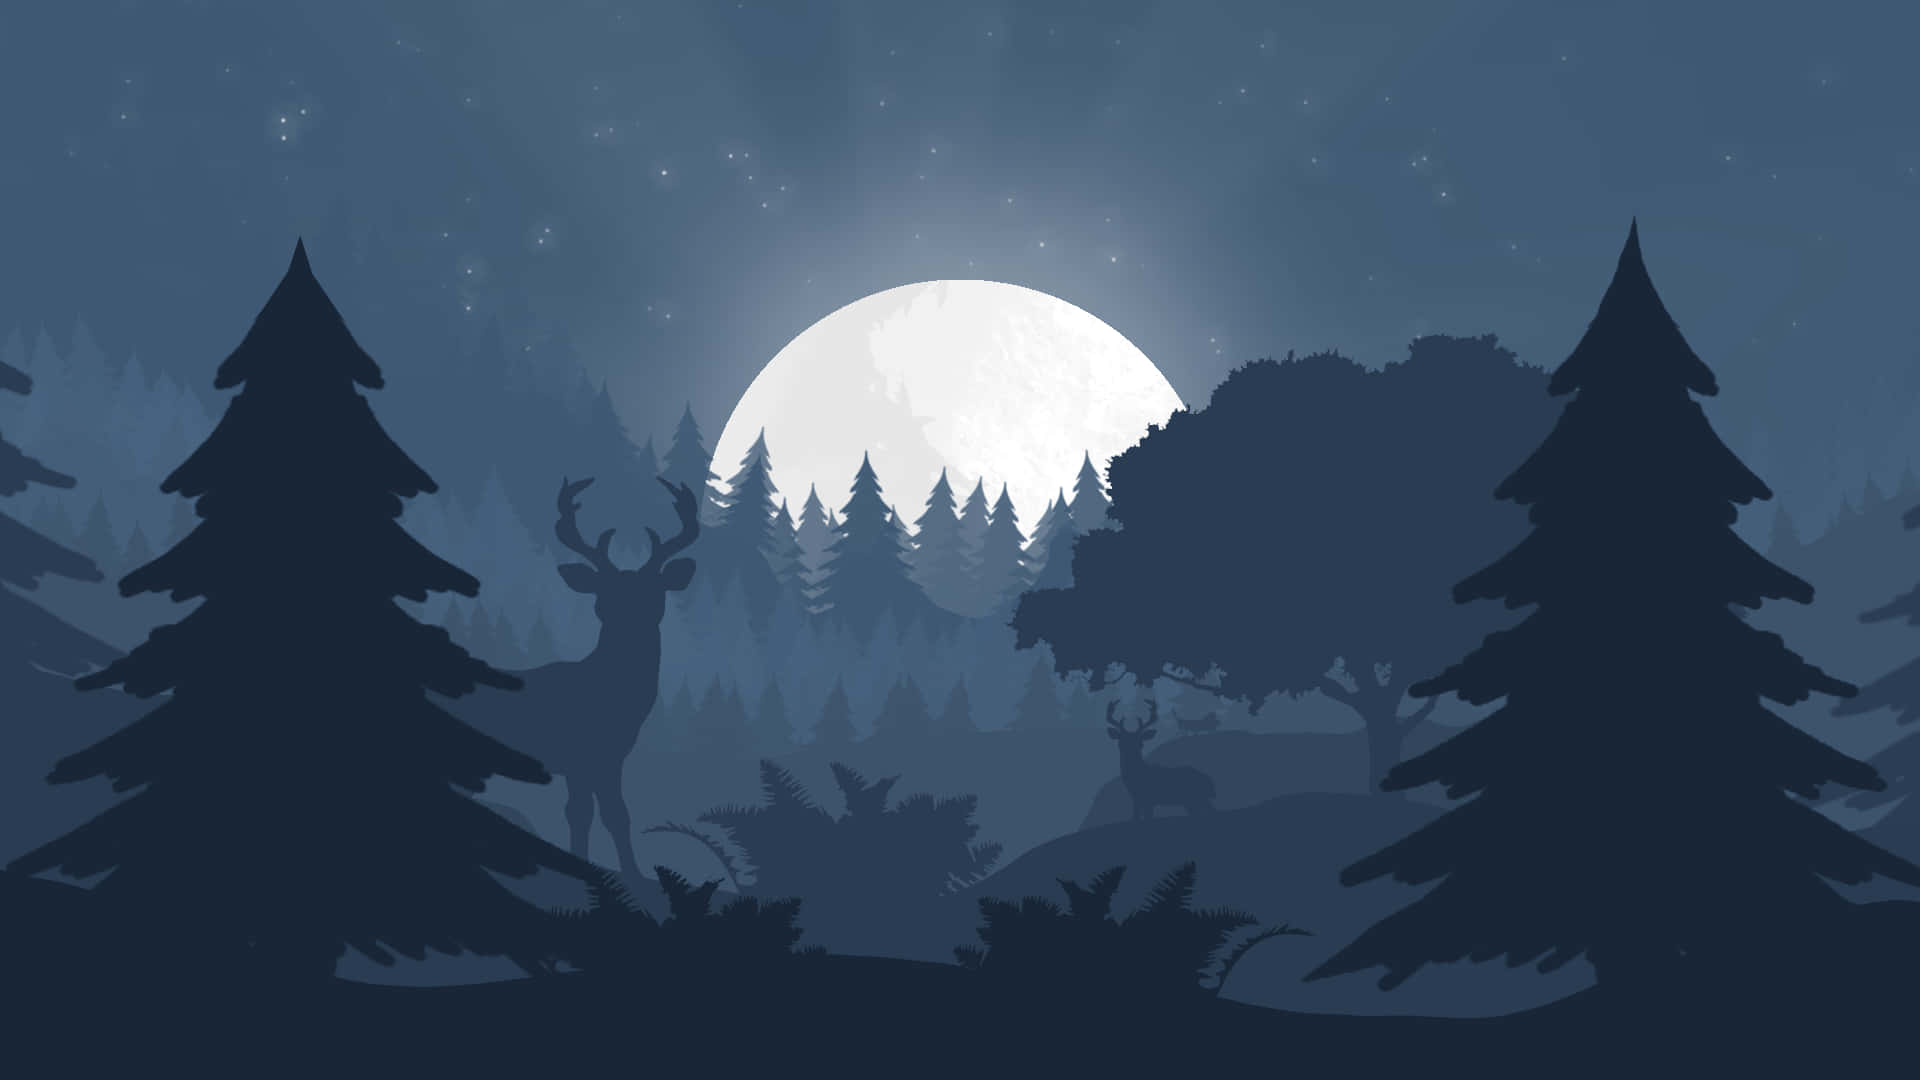 A Forest With Deer And Trees At Night Wallpaper